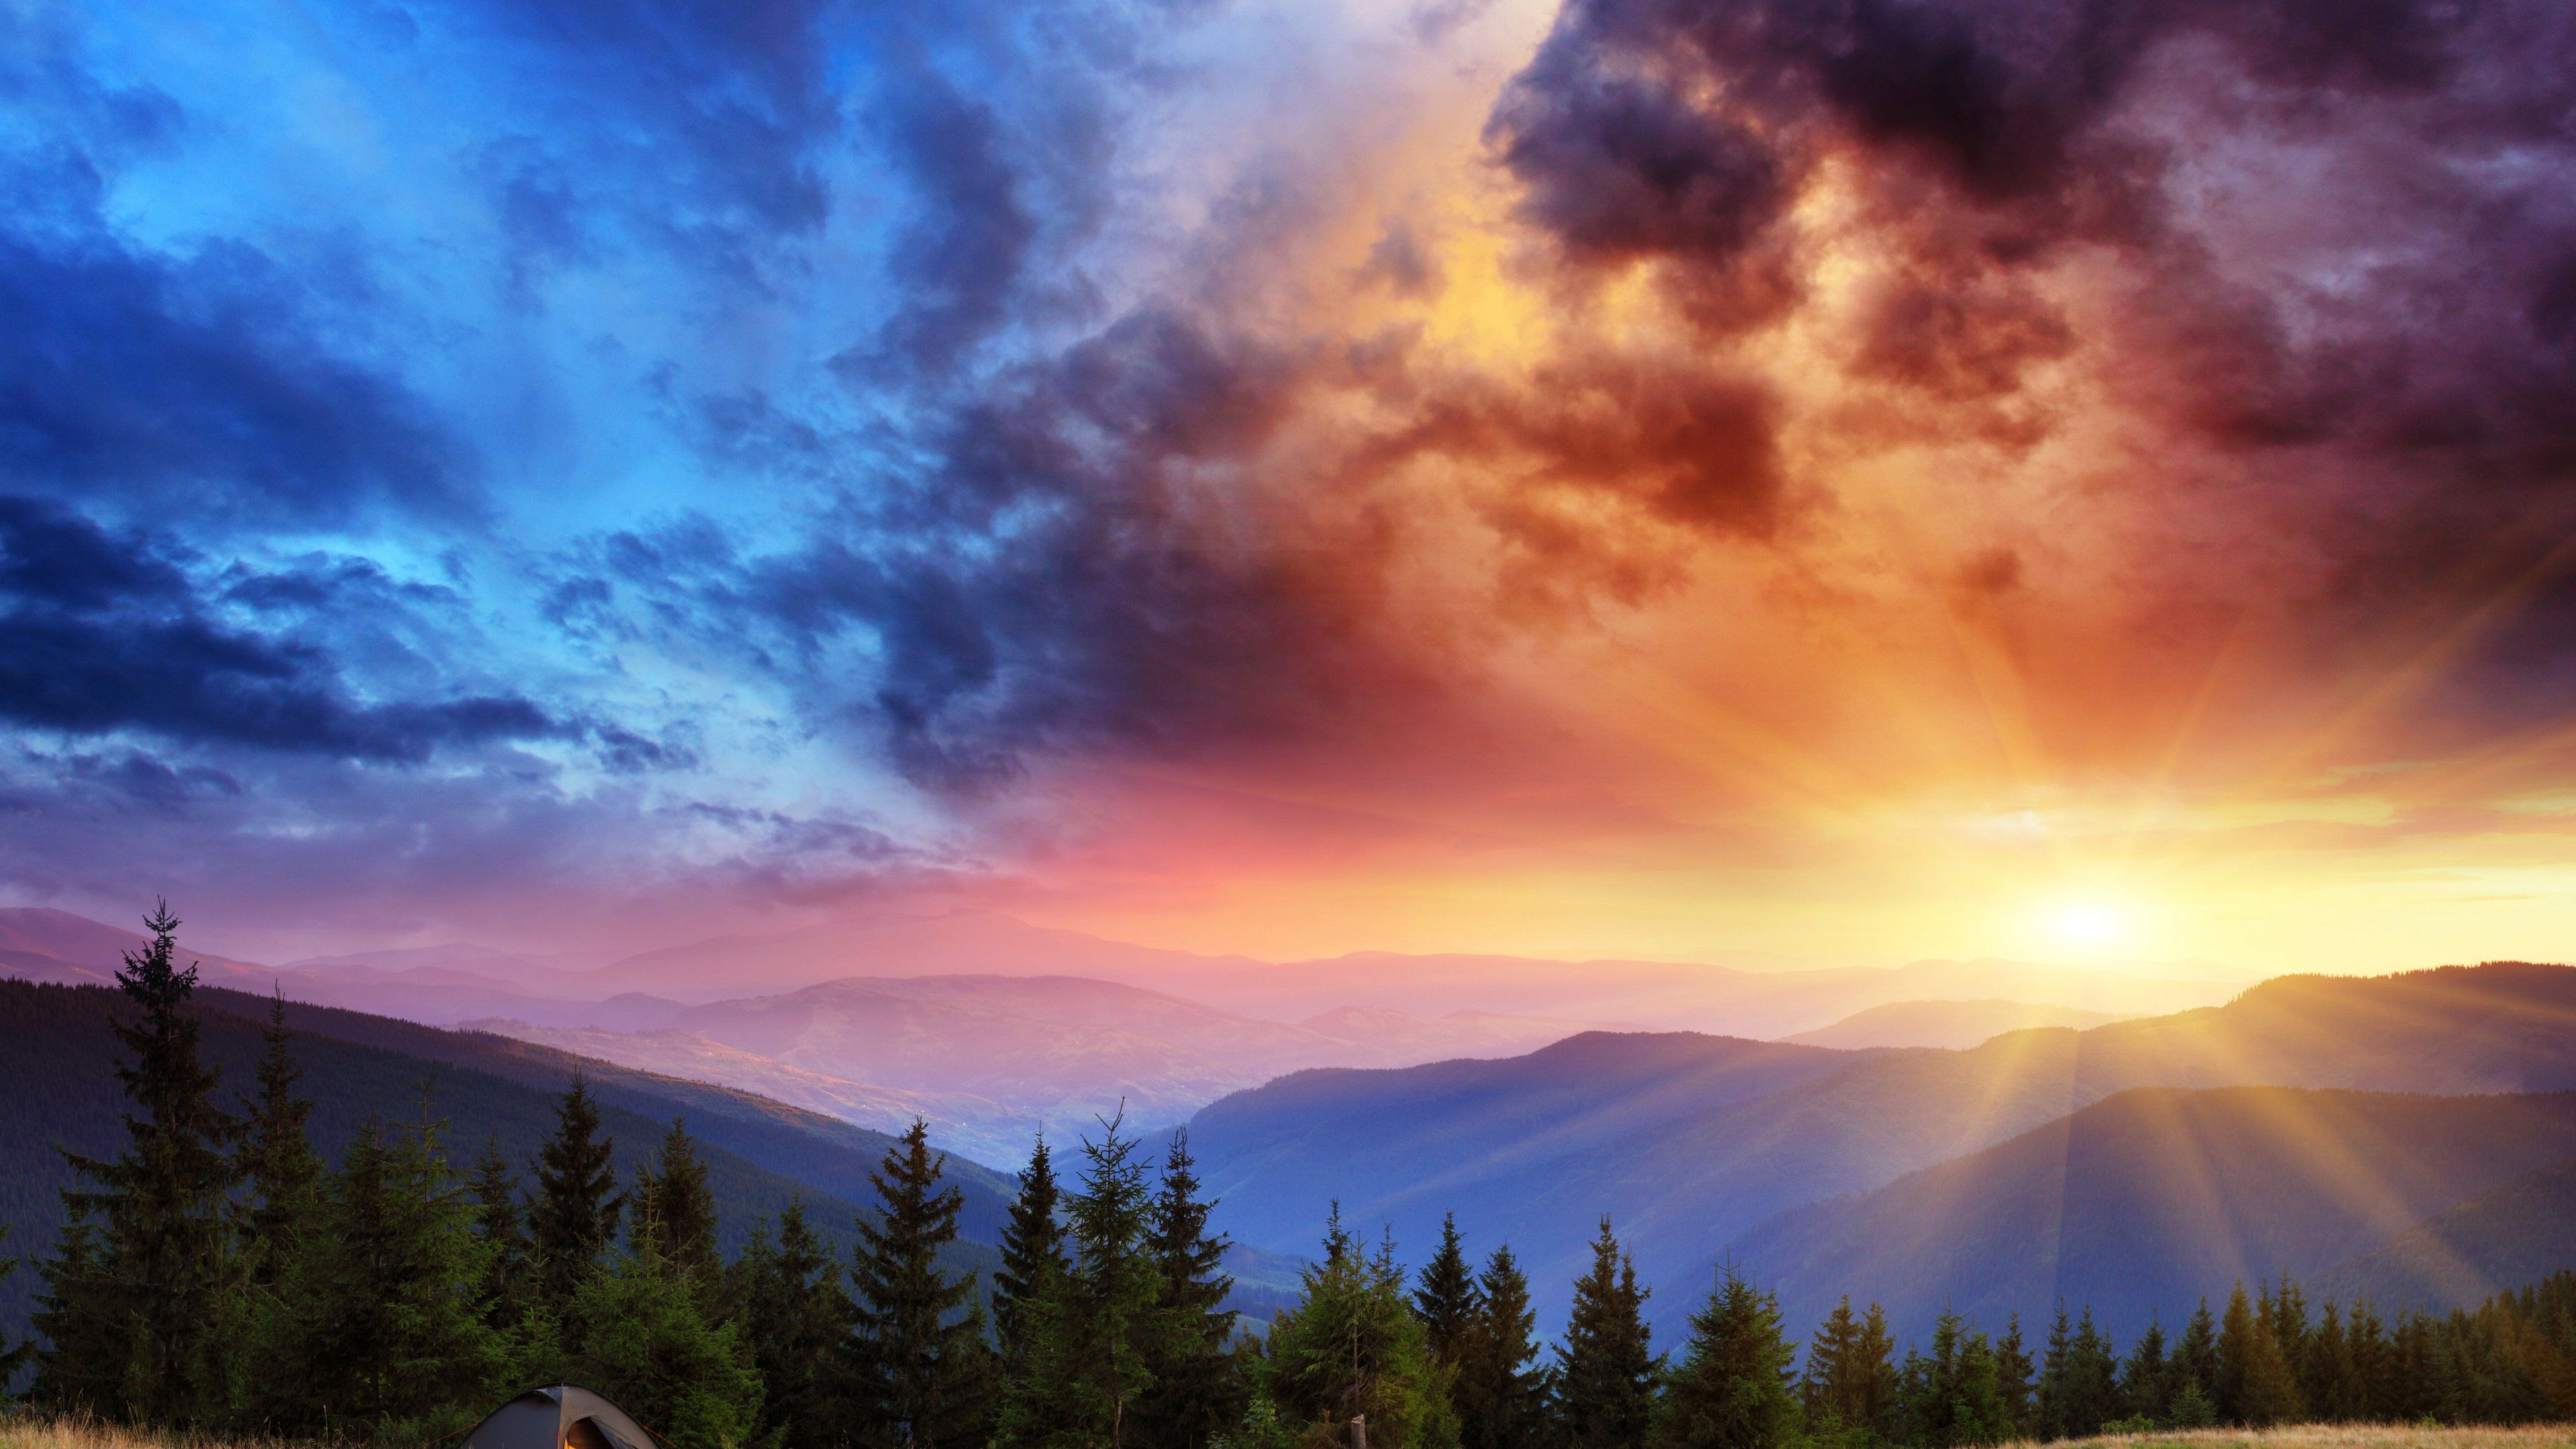 385 Sunrise HD Wallpapers Backgrounds - Wallpaper Abyss